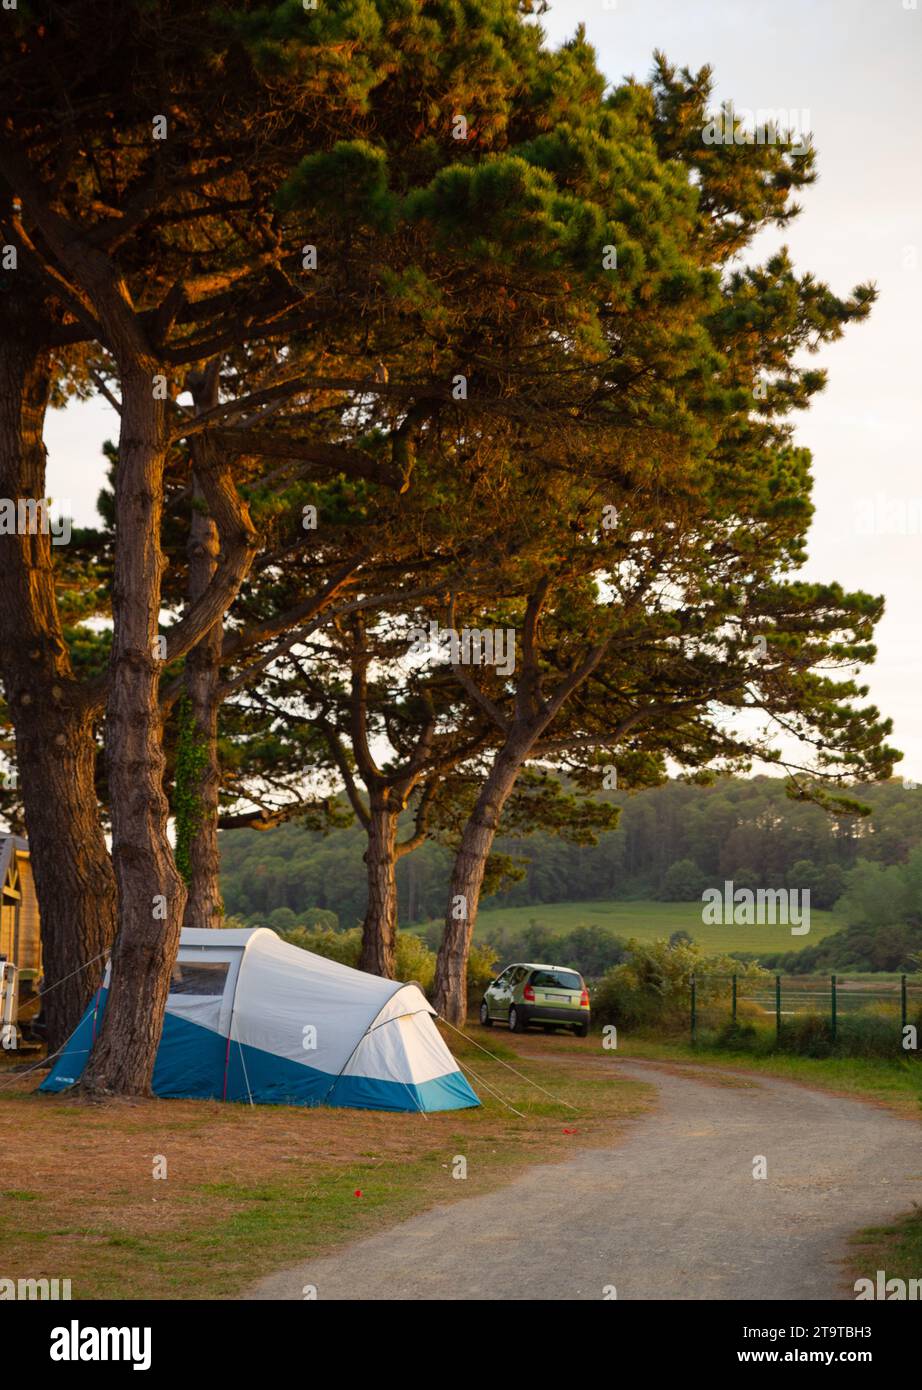 a tent camping under the pine trees at sunset, Europe rural campsite Stock Photo